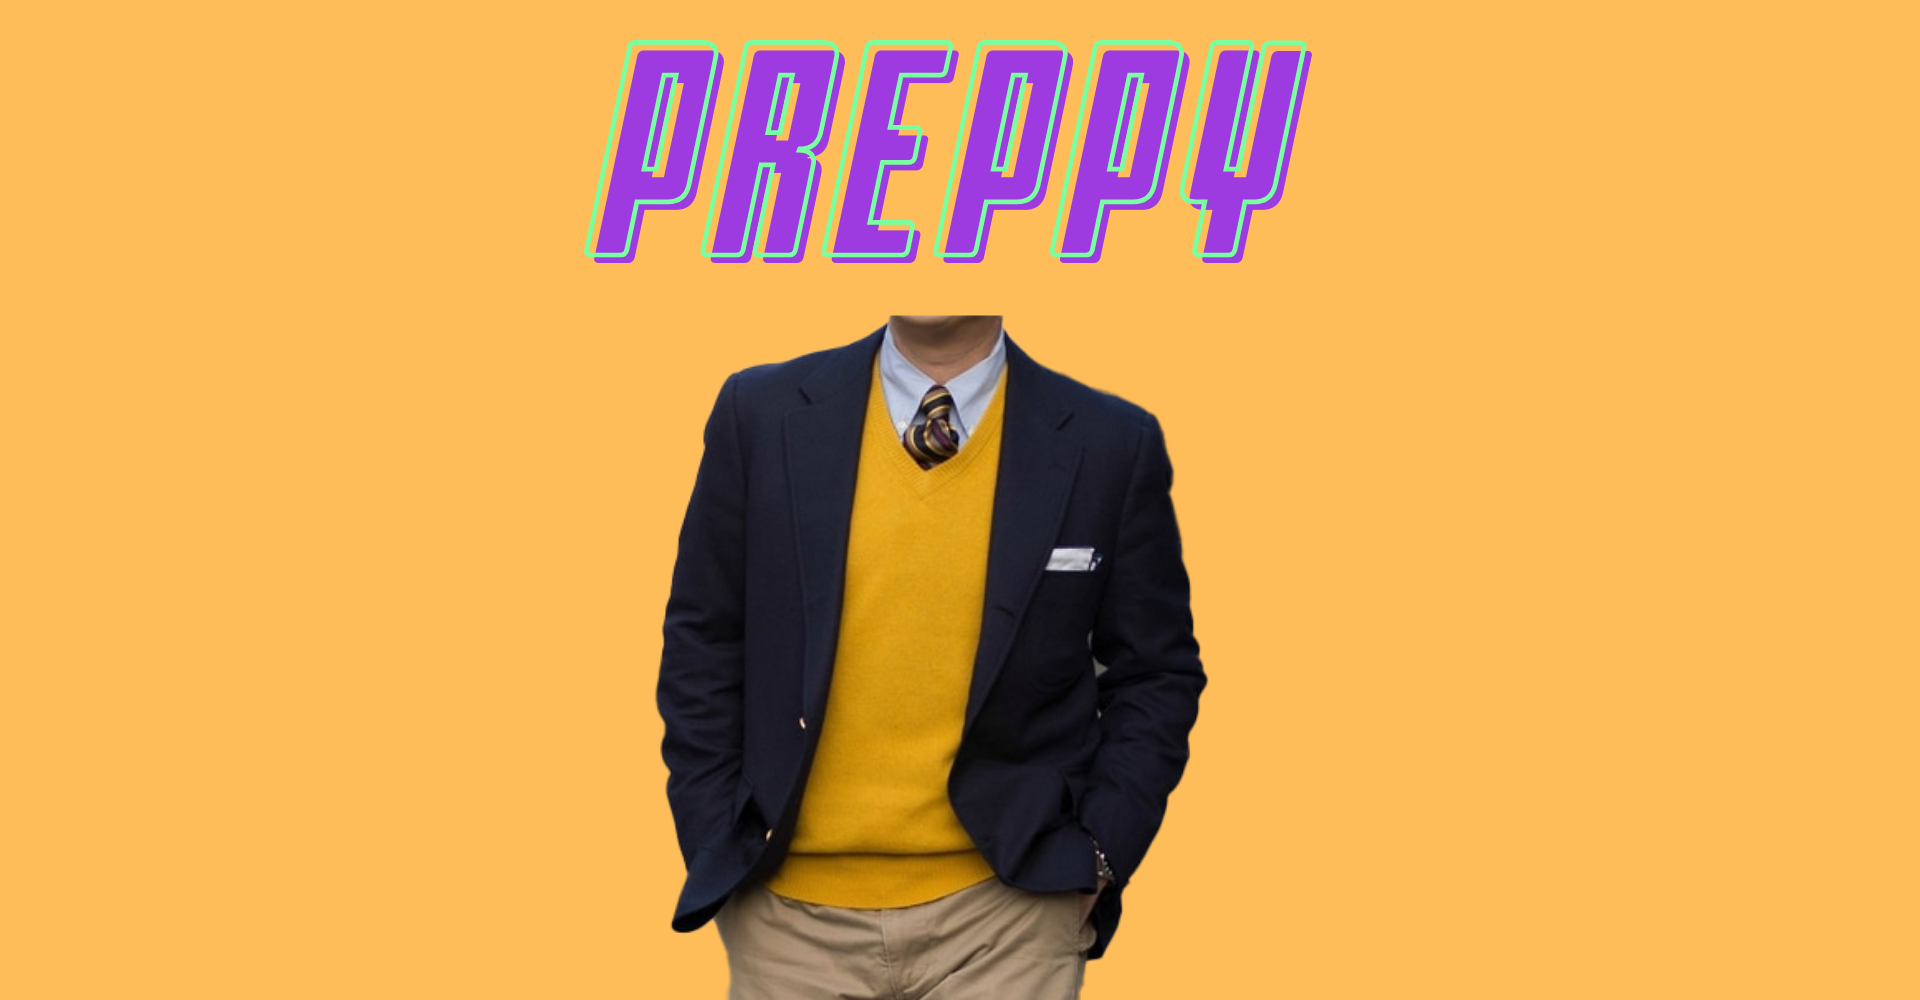 Preppy Style Is Back In 2022. Here's How to Wear It